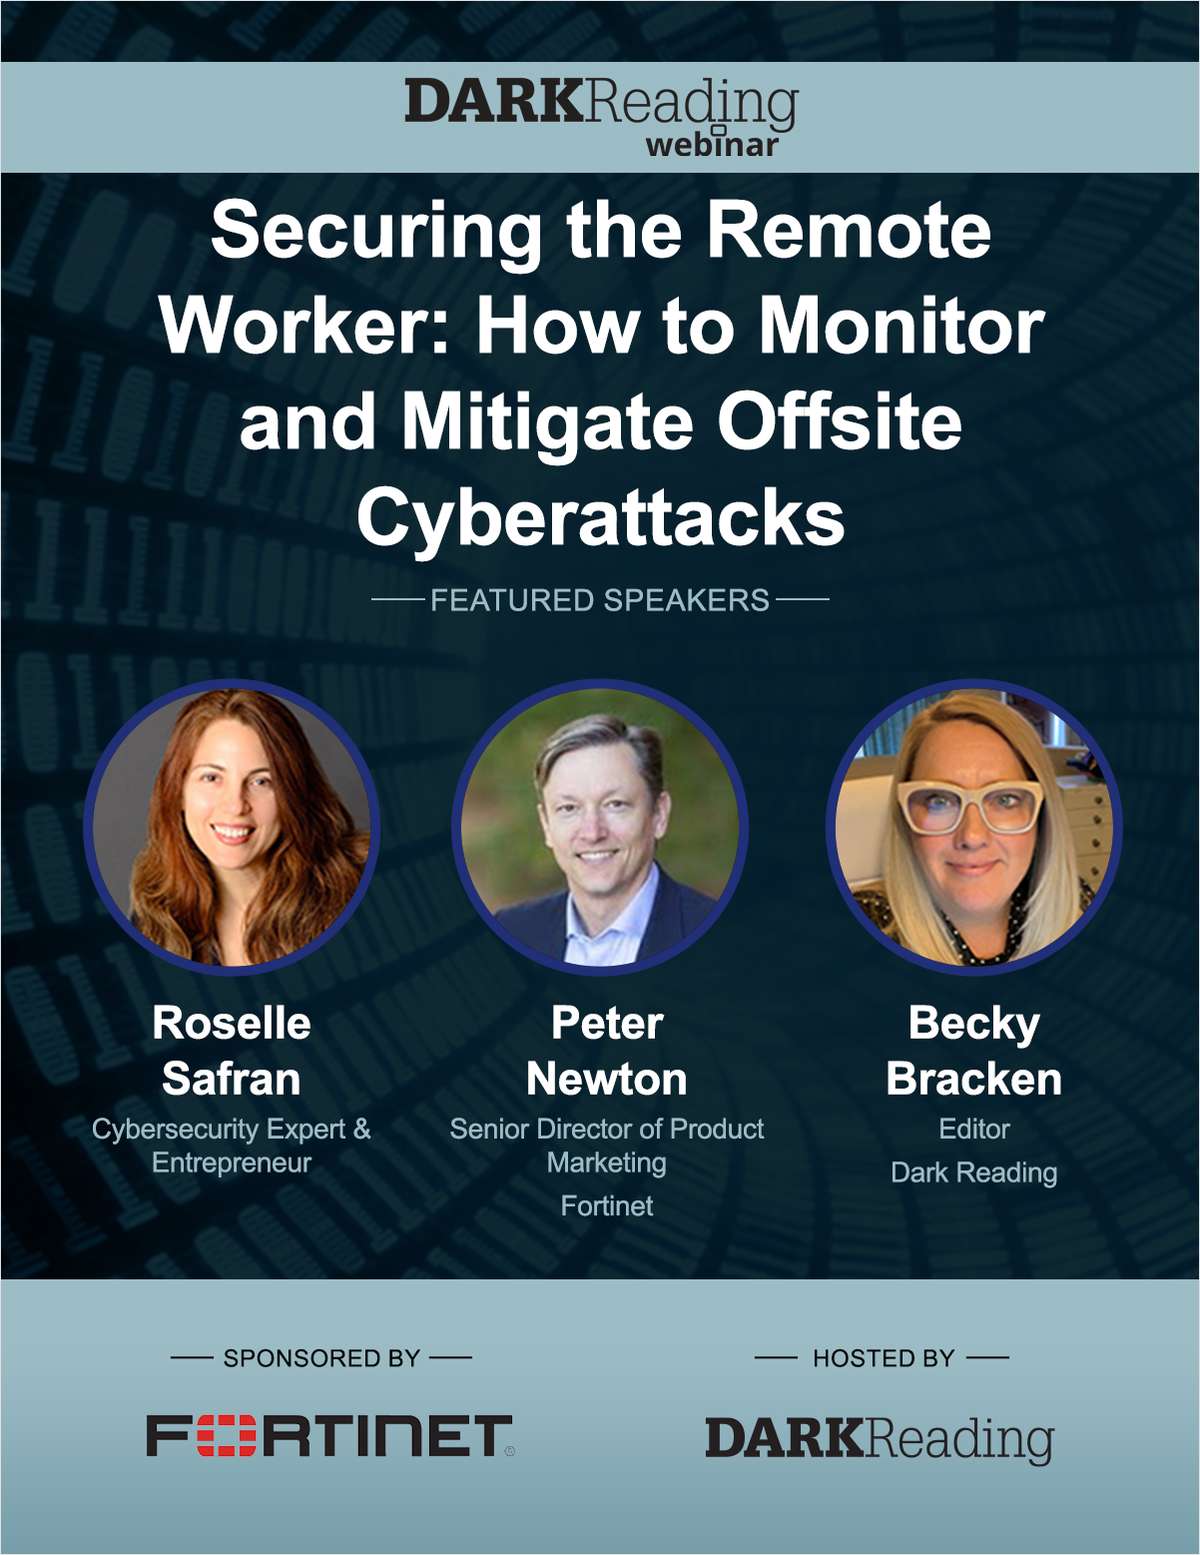 Securing the Remote Worker: How to Monitor and Mitigate Offsite Cyberattacks